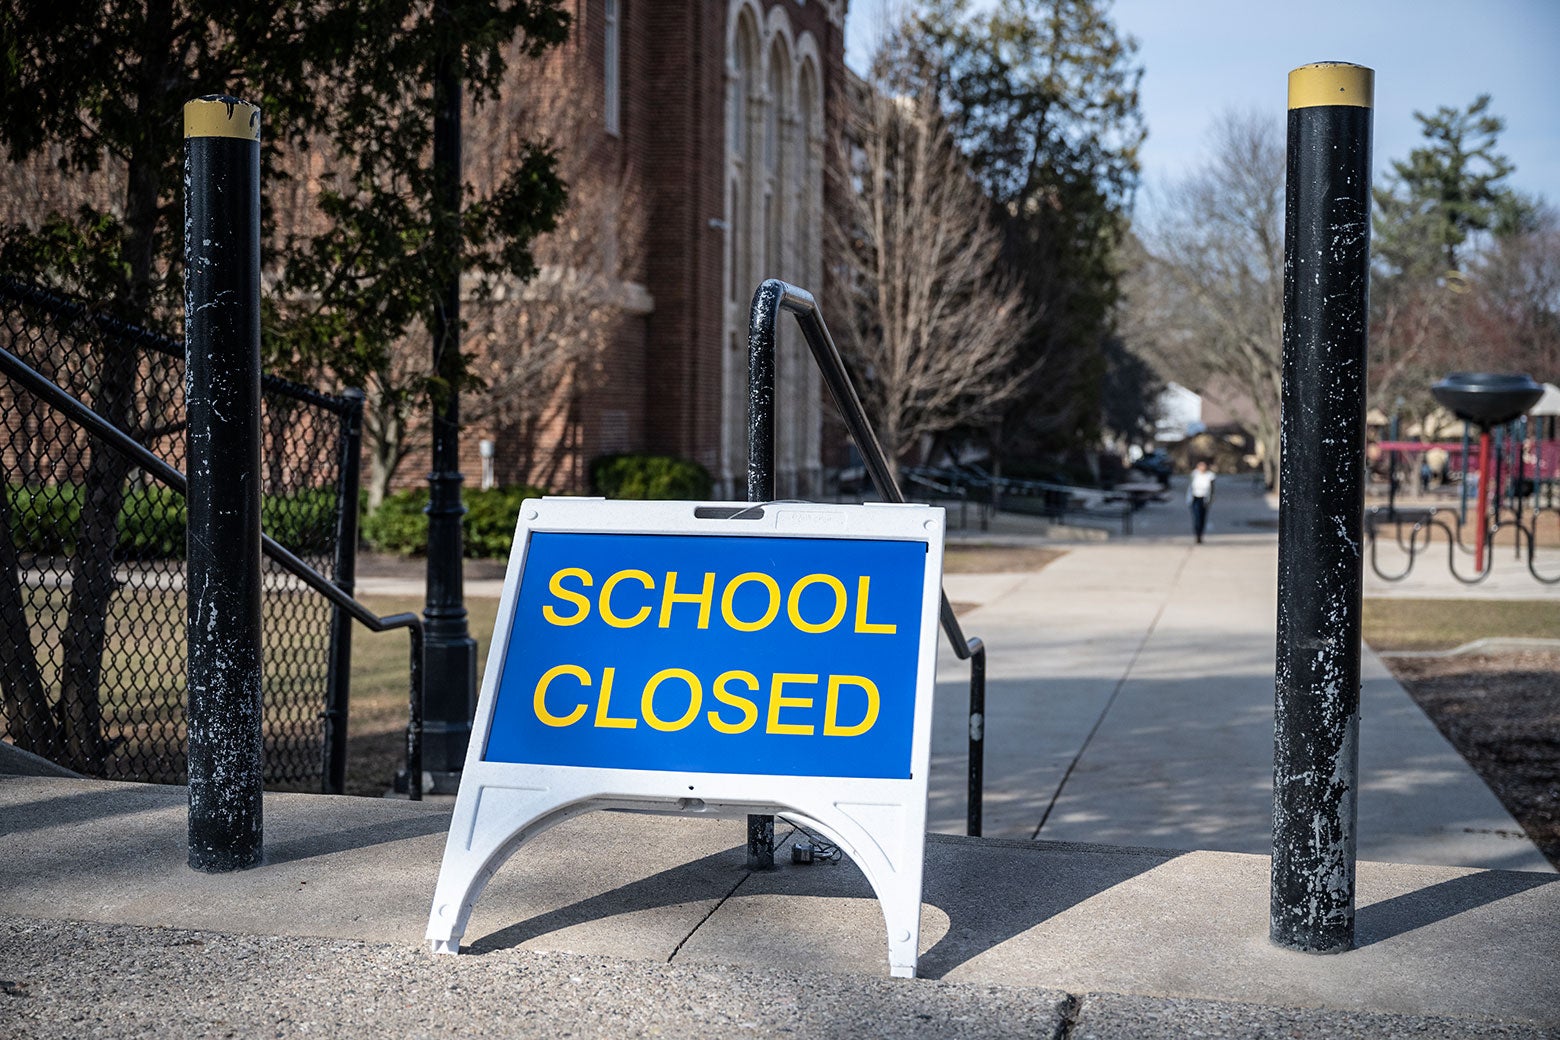 A sign that says, "School closed" outside of a brick building.